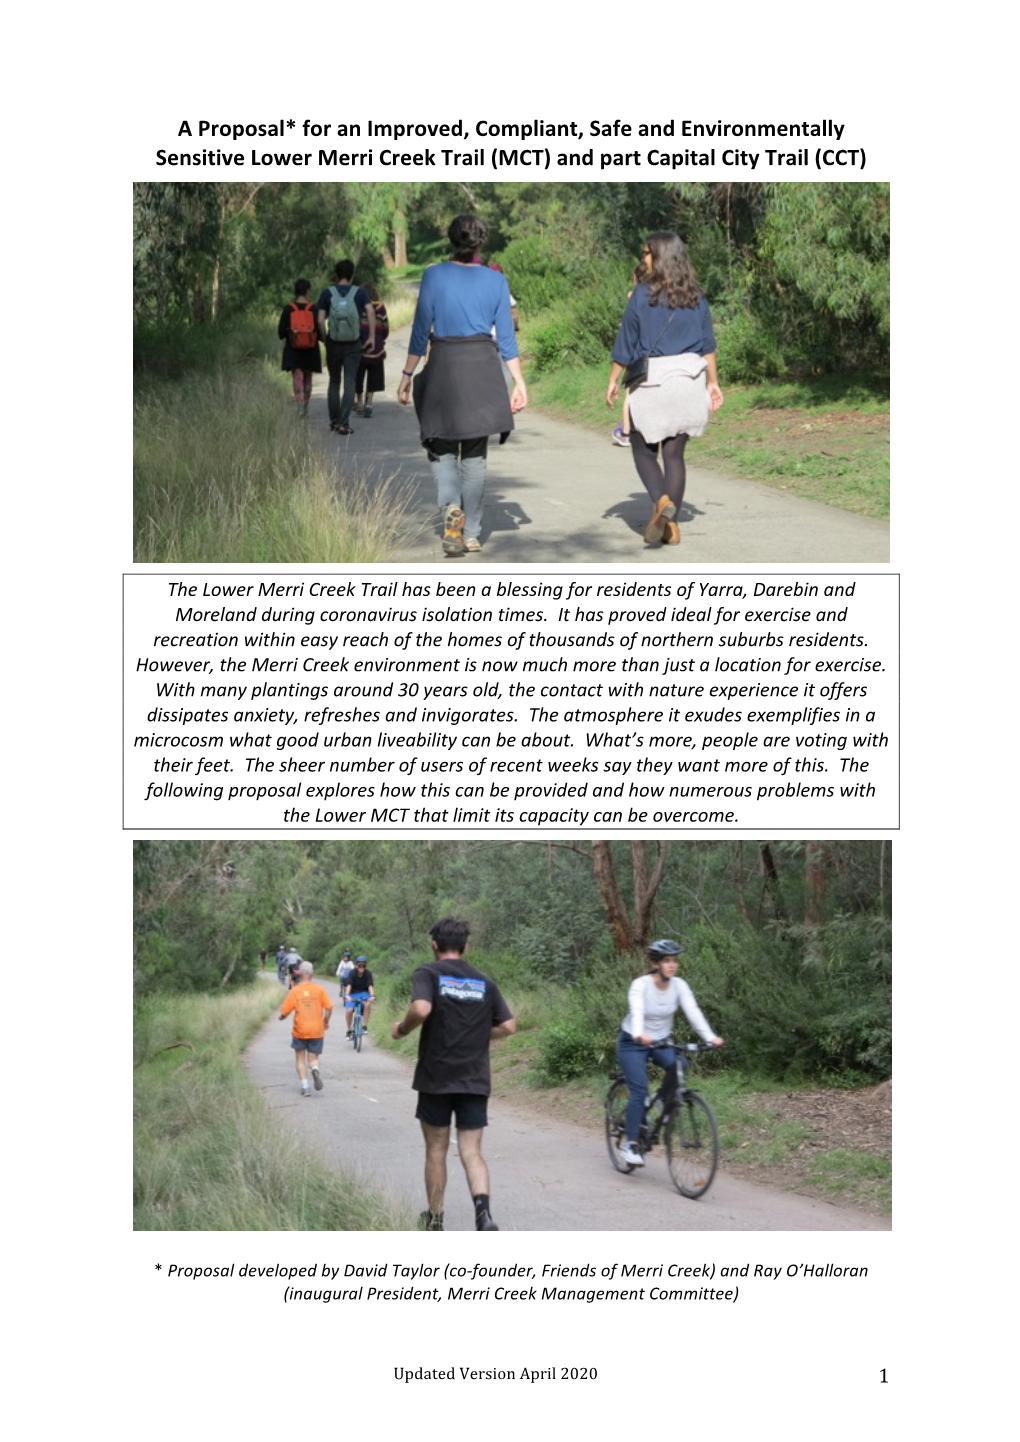 A Proposal* for an Improved, Compliant, Safe and Environmentally Sensitive Lower Merri Creek Trail (MCT) and Part Capital City Trail (CCT)